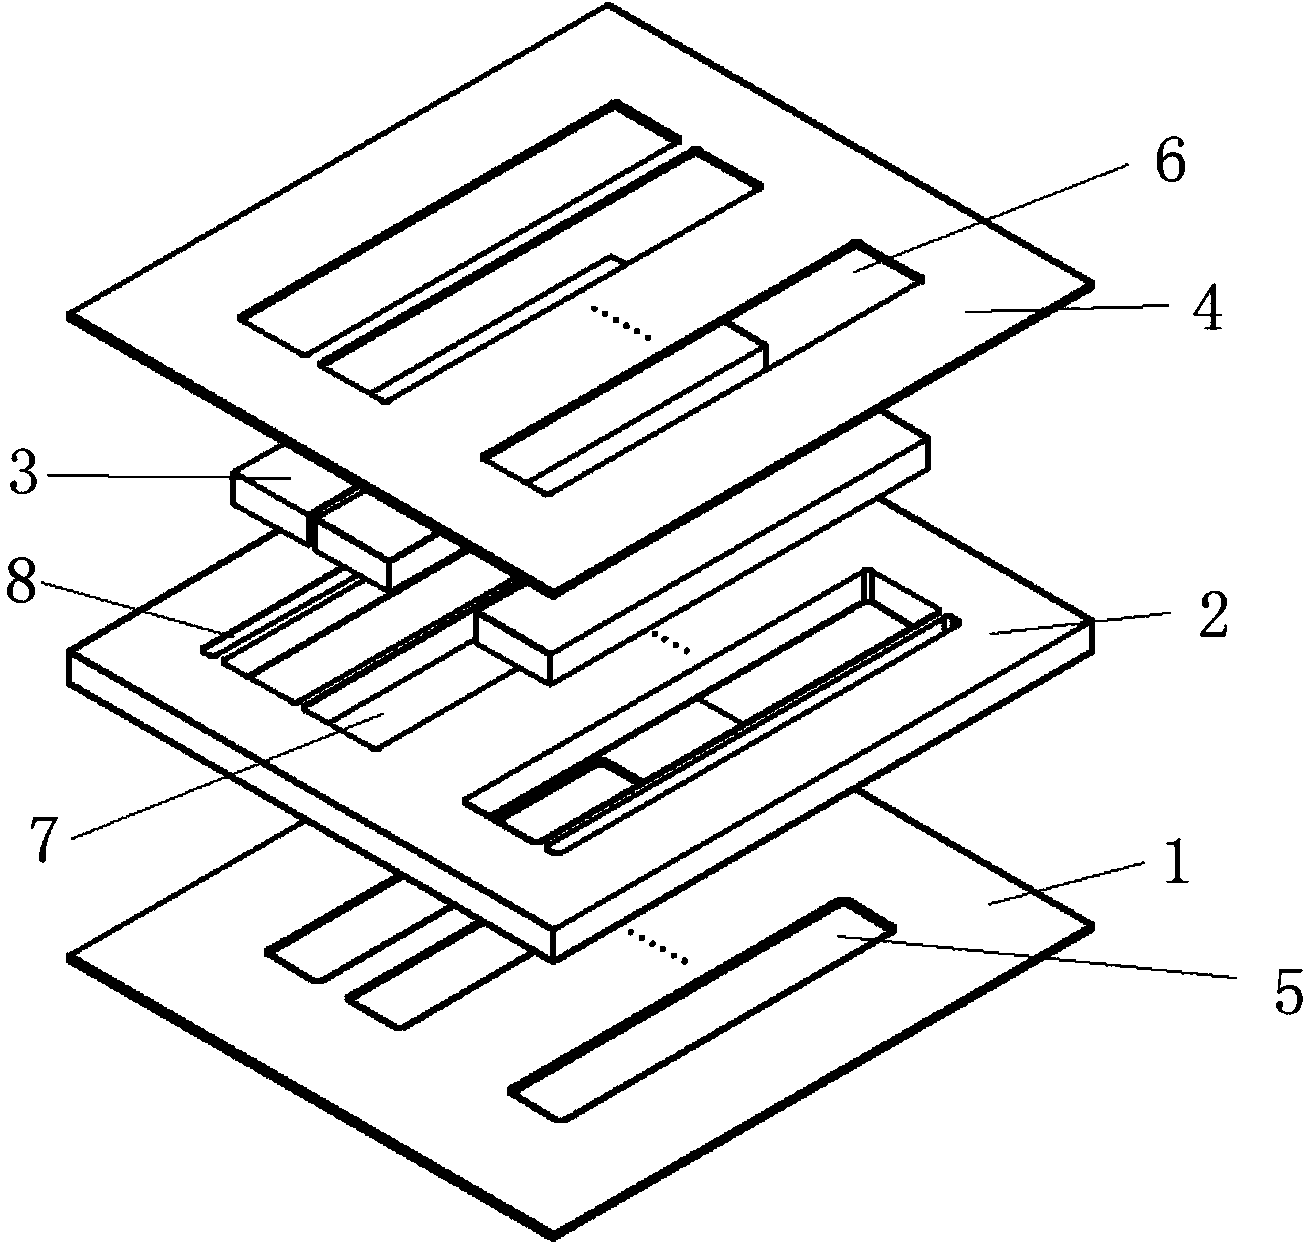 Narrow-slit spliced assembly of multi-waveband filters applied at low temperature